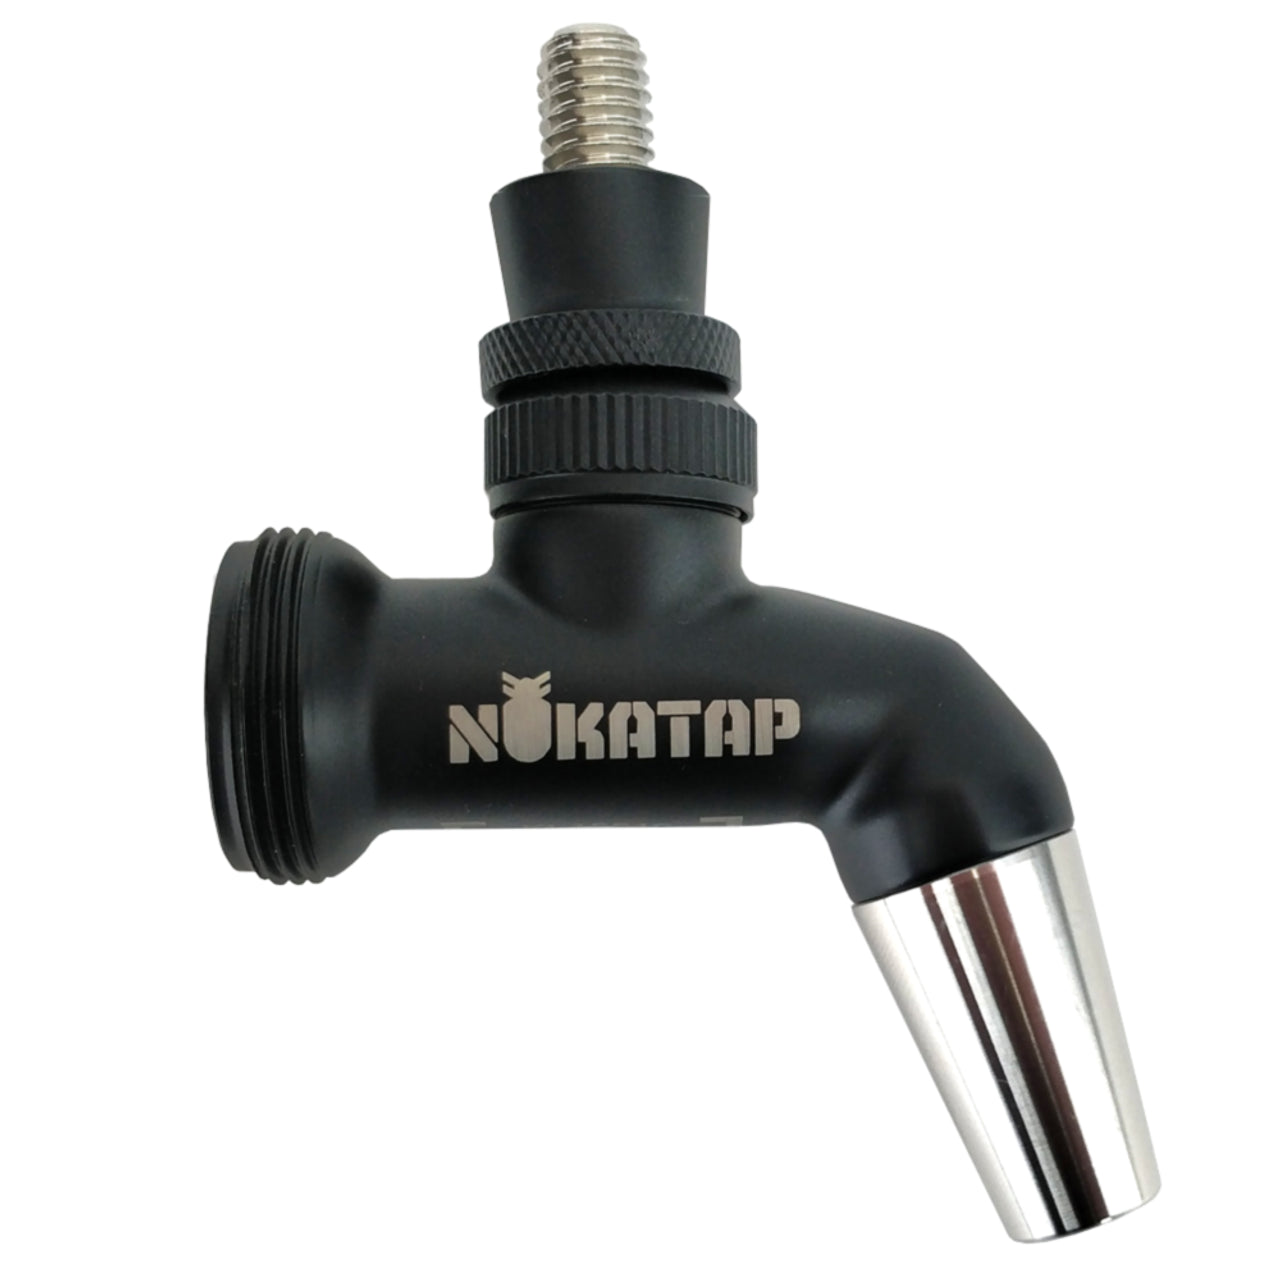 Nukatap Stainless Steel - Black - Punisher Edition - All Things Fermented | Home Brew Shop NZ | Supplies | Equipment